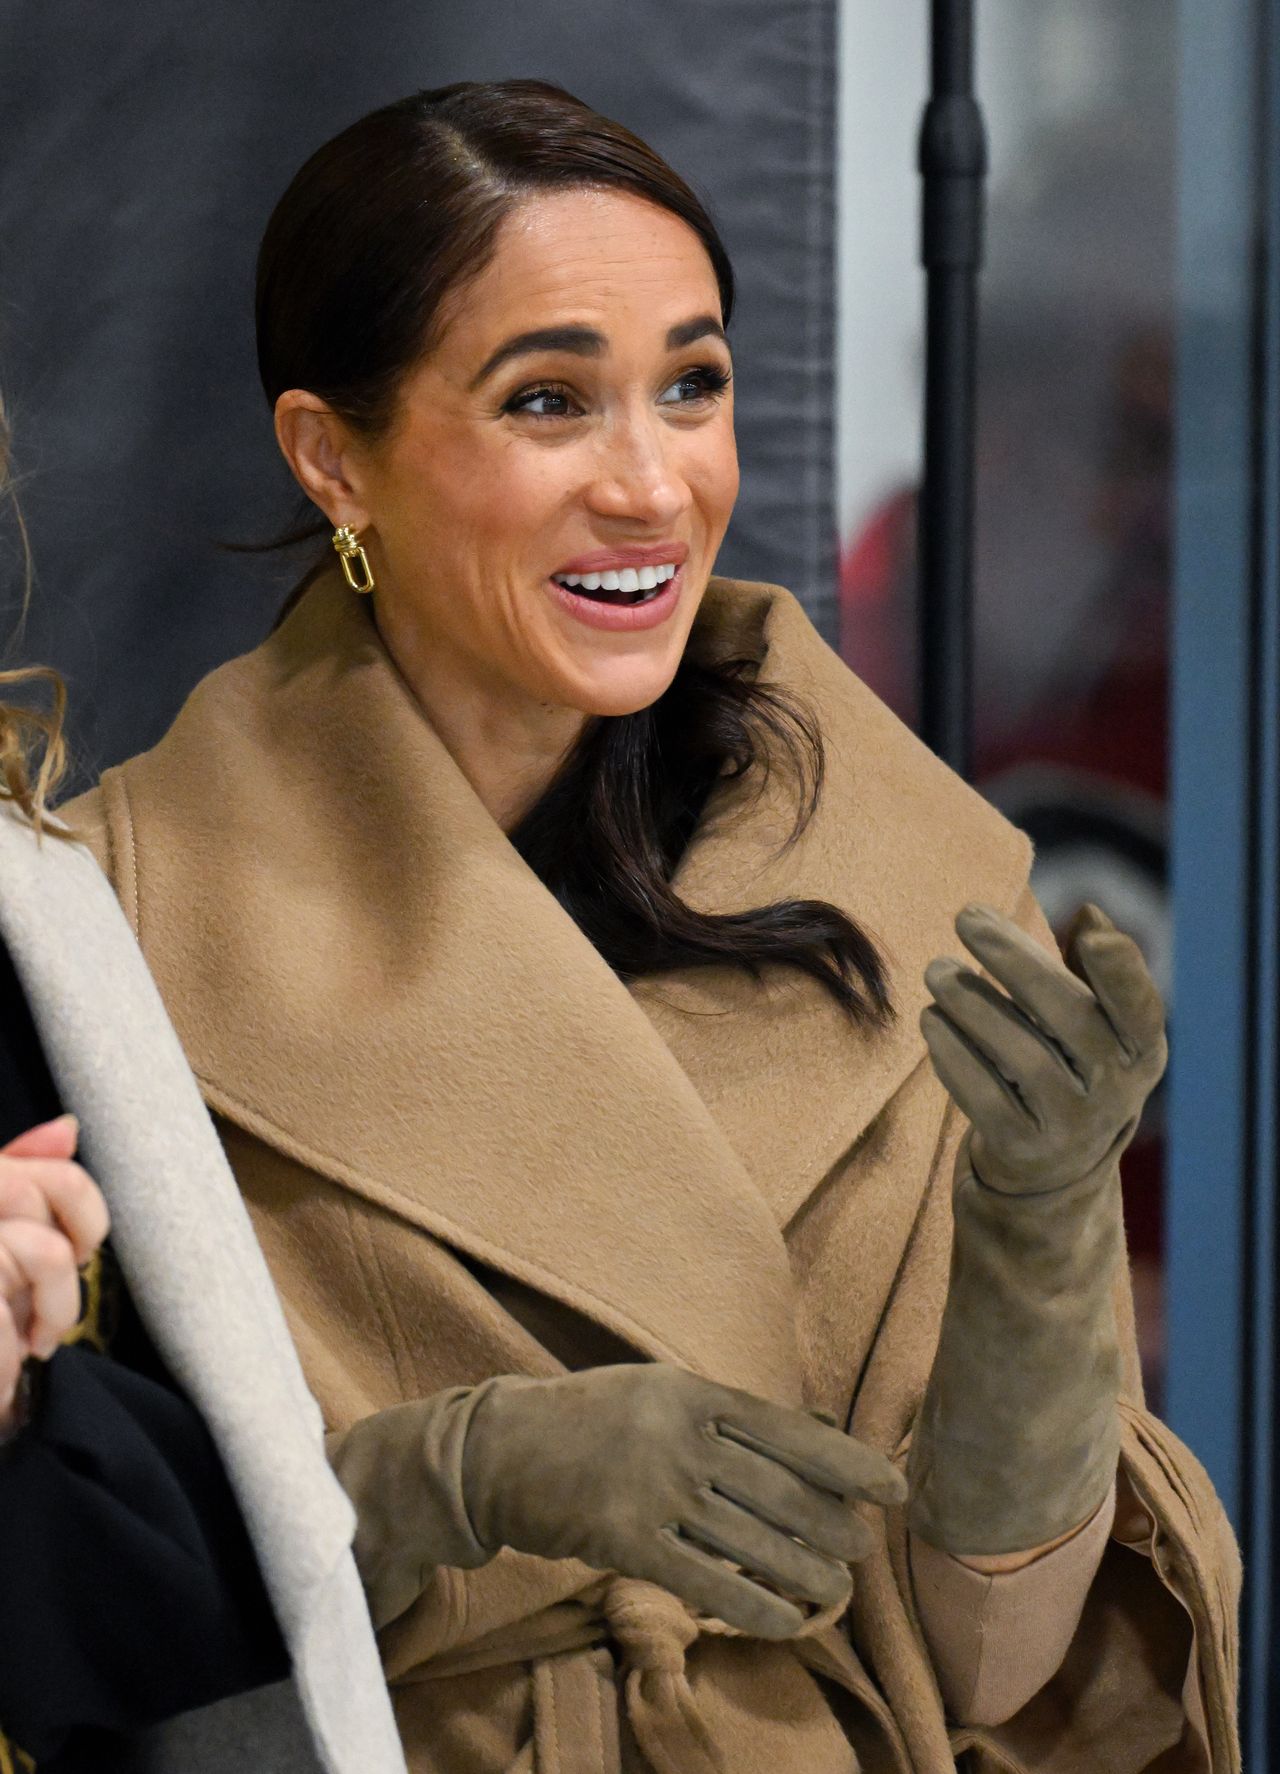 Meghan Markle's personal secretary broke the silence on the issue of BULLYING.